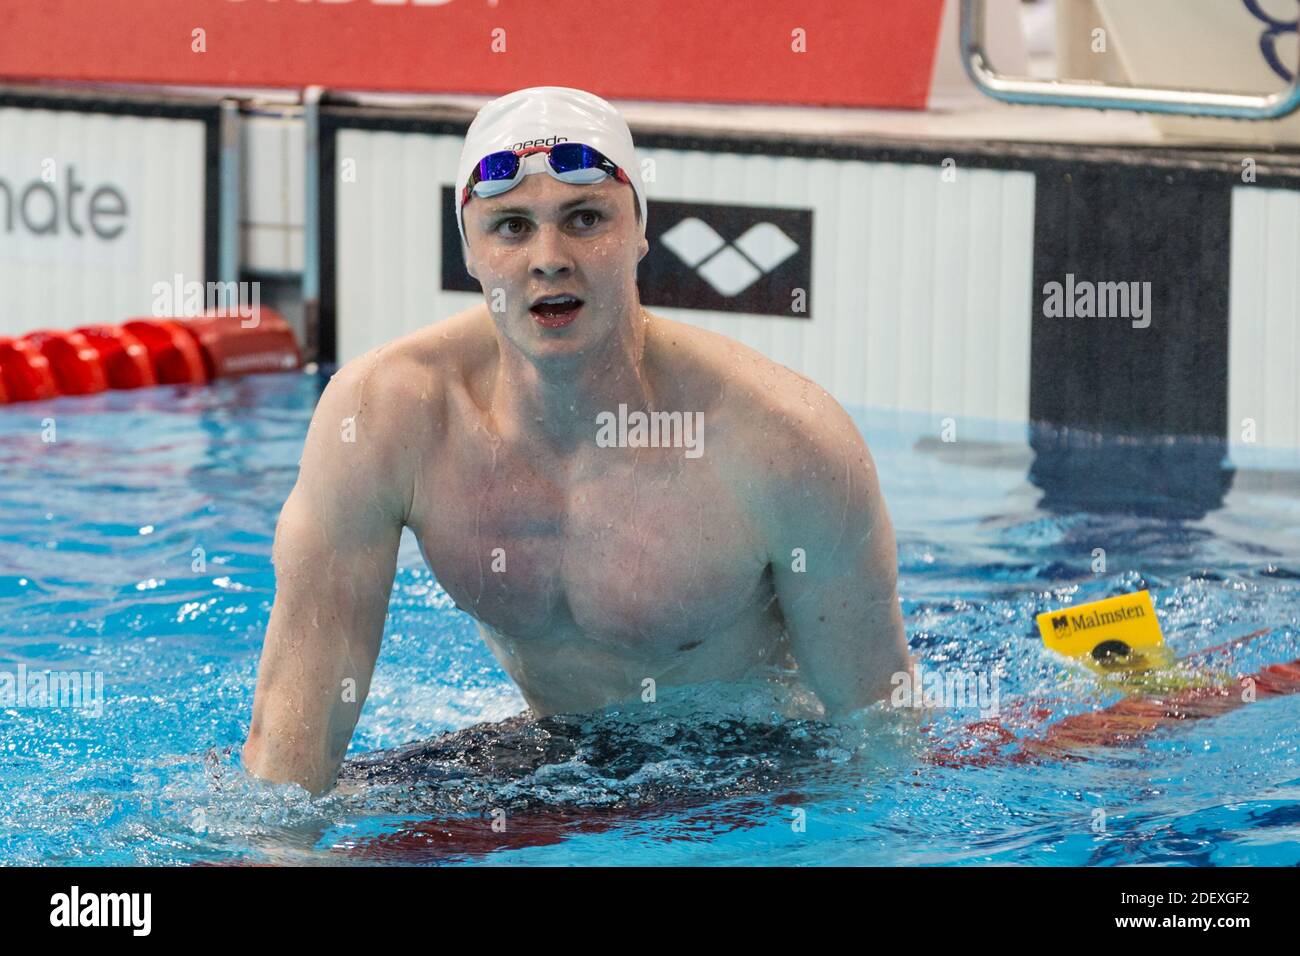 Ross Murdoch, British Swimmer, after winning a race at the European Swimming Championships, London, UK Stock Photo